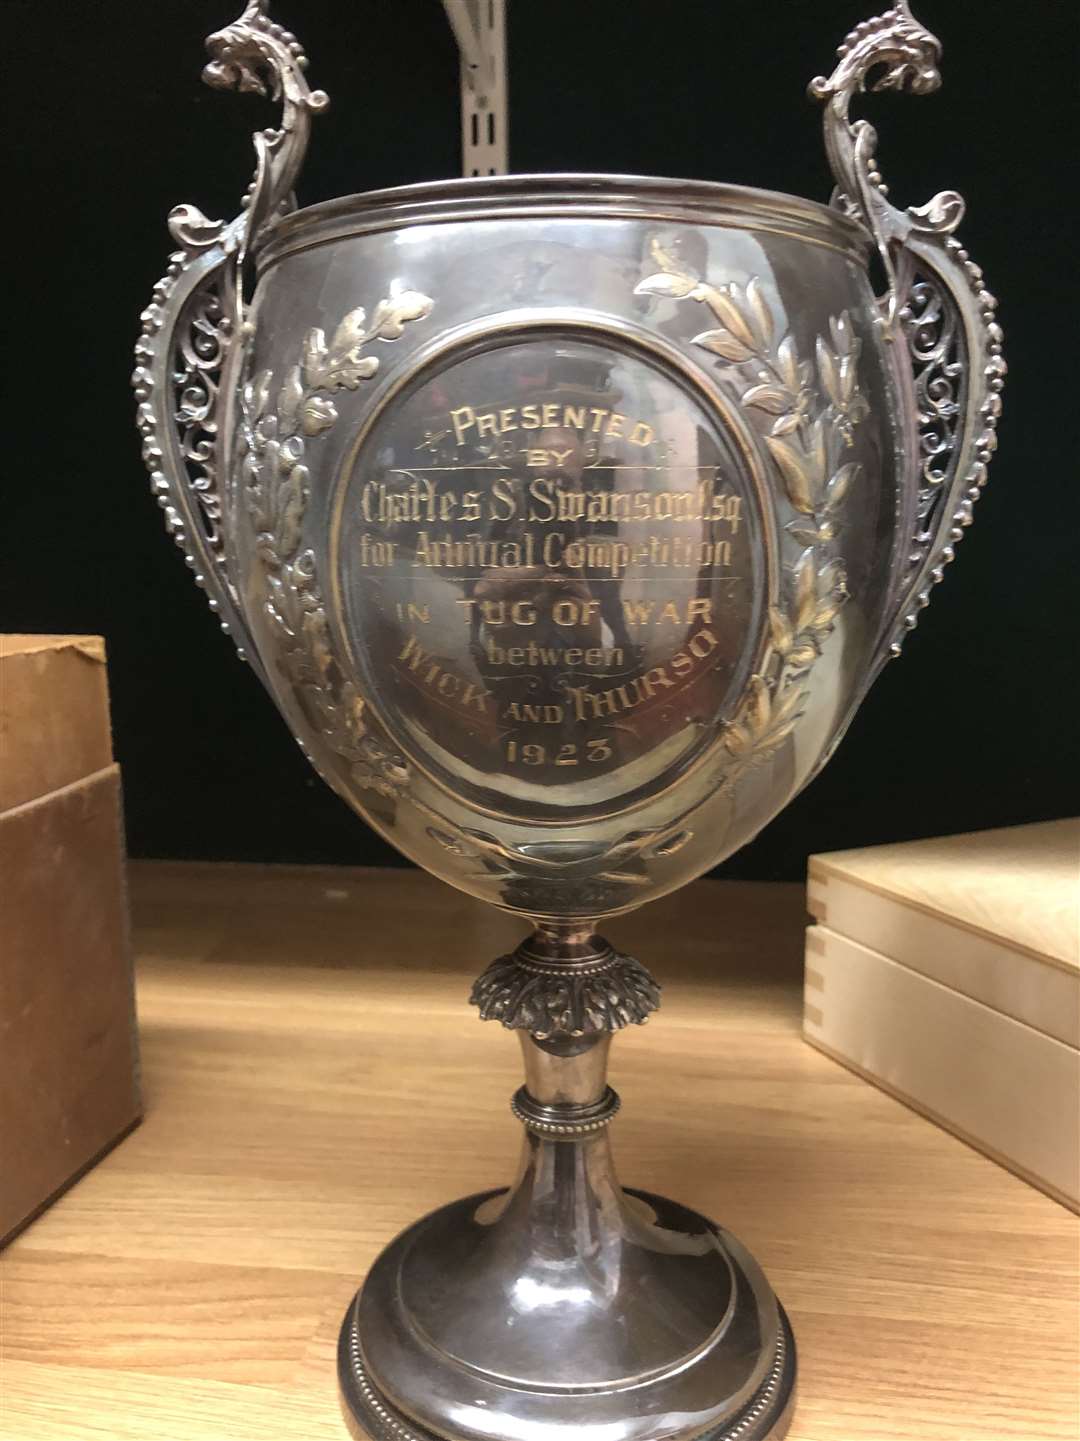 The Charles Swanson silver cup was awarded for a tug-of-war challenge between Thurso and Wick from 1923 to 1933.